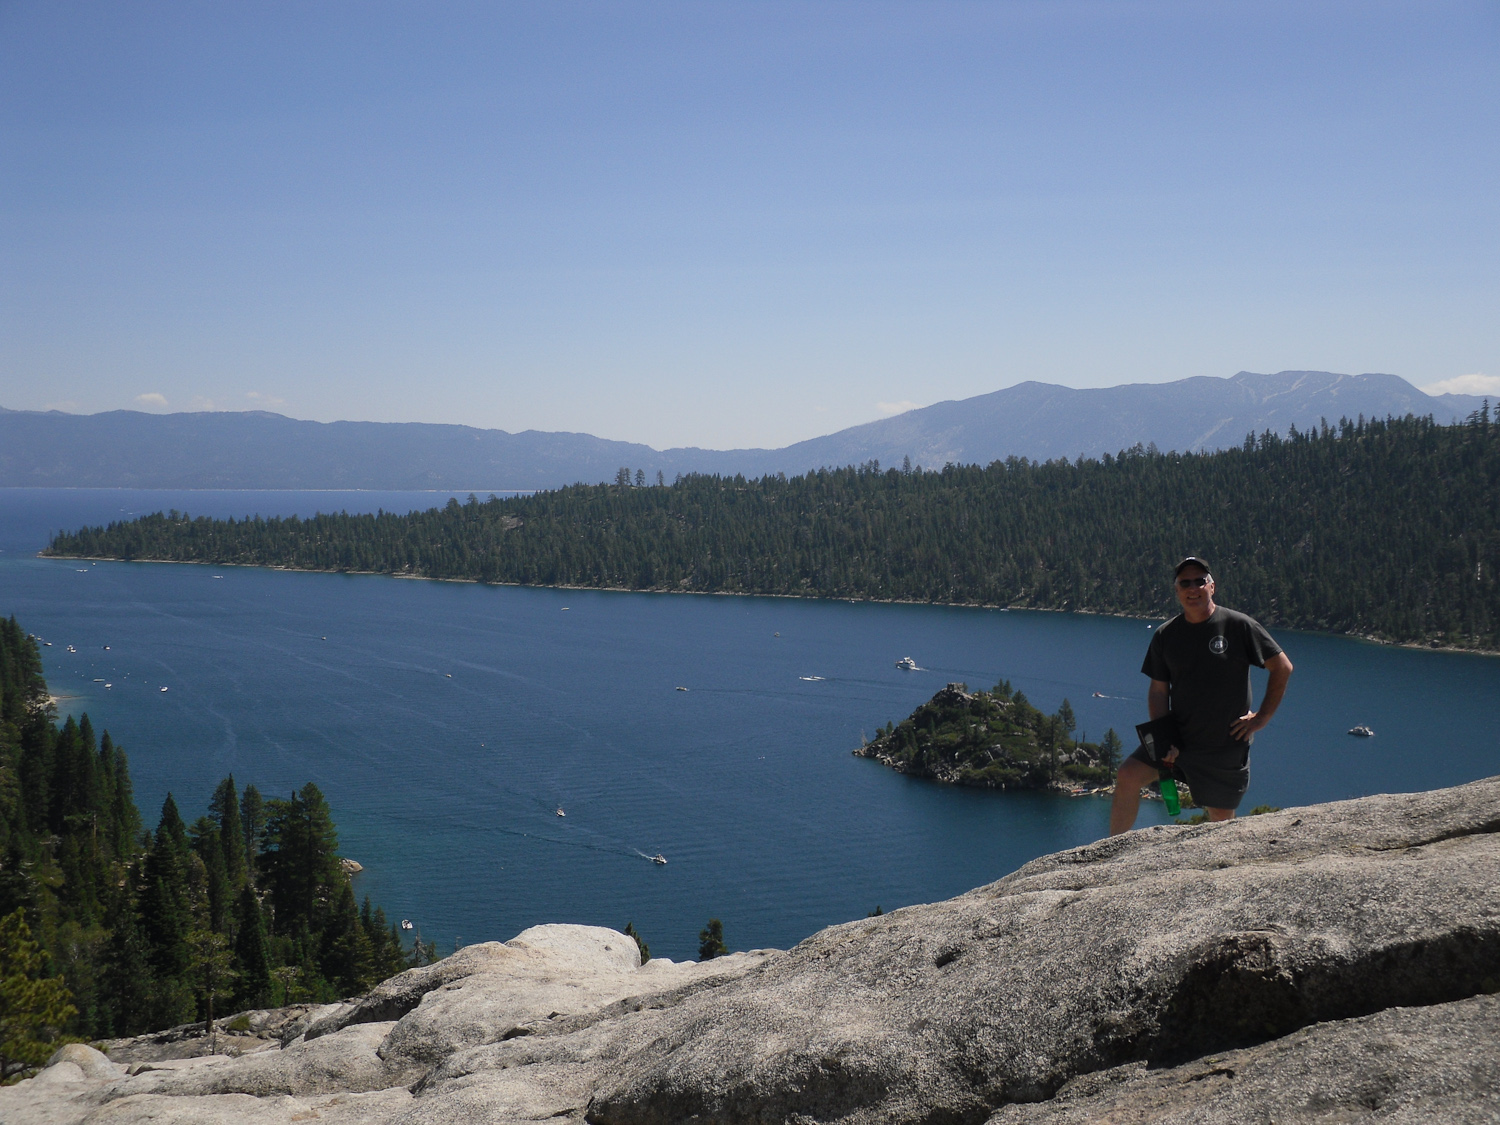 Bob with Emerald Bay and Fannette Island in background